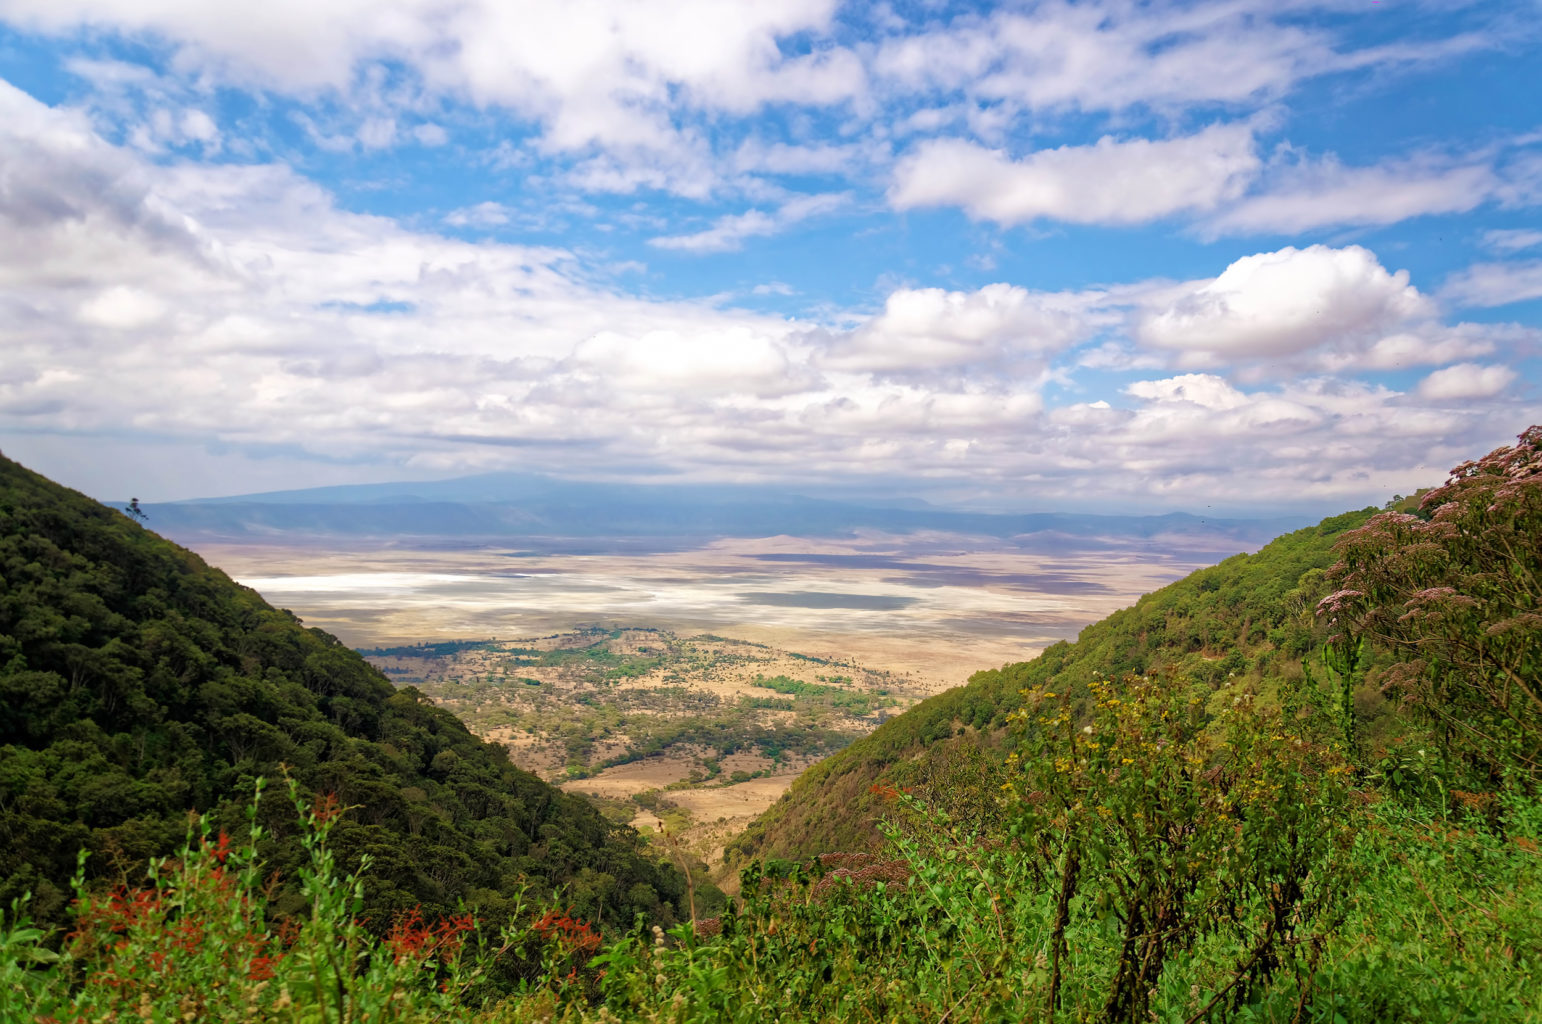 Ngorongoro Conservation Area (incl. Crater)